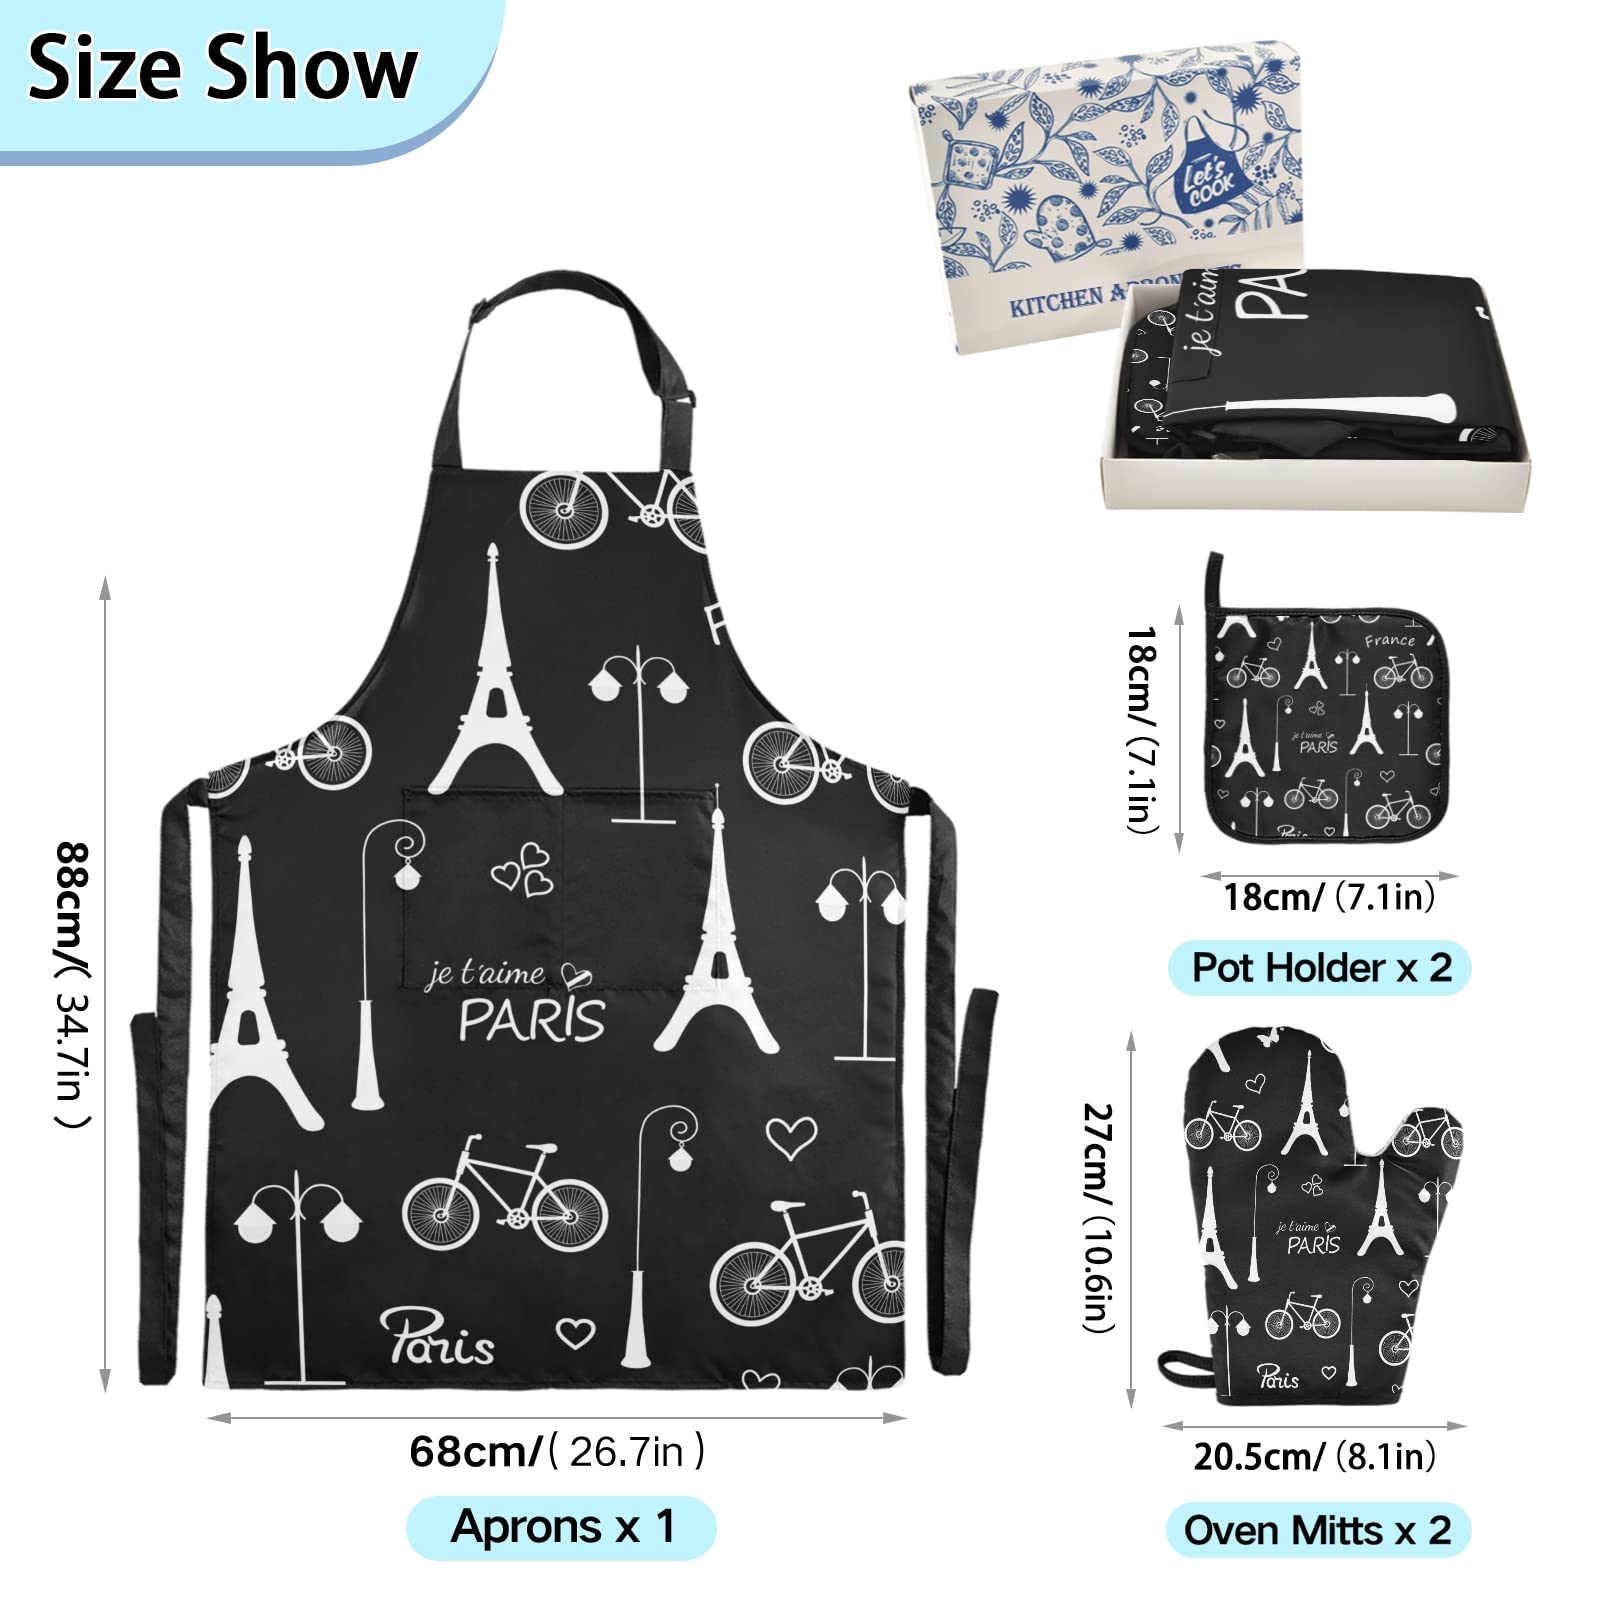 White Eiffel Tower Bicycle ords Paris France on Dark Black 5 Pcs Set Cooking Apron Heat Insulated Oven Mitts with Pot Holder Pad, Kitchen Oven Gloves Protectors Mat for Grilling Baking